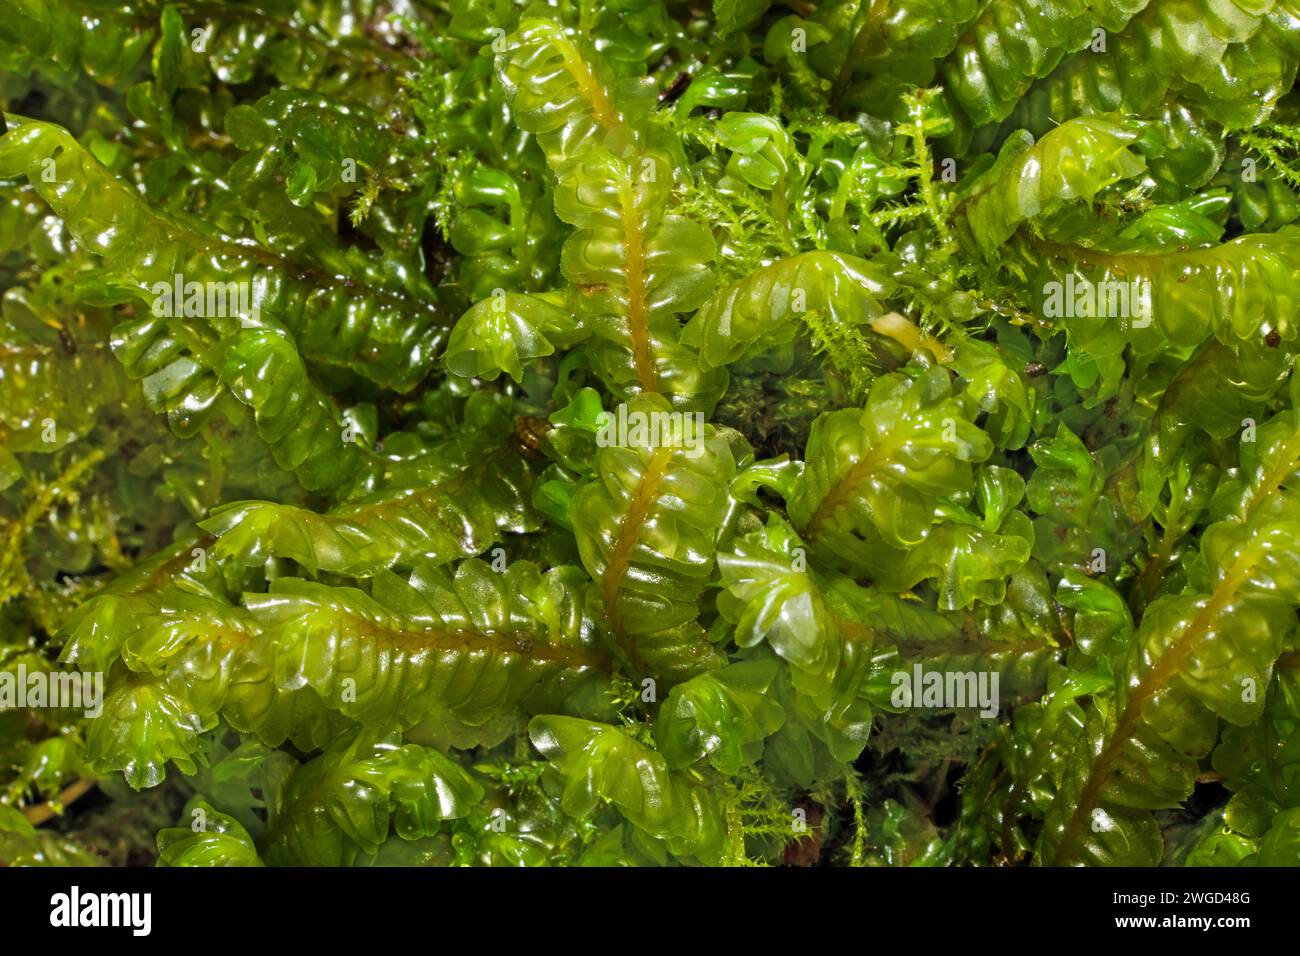 Plagiochila asplenioides (Greater Featherwort) is a liverwort found on damp turf in sheltered woodland. Mostly recorded in the Northern Hemisphere. Stock Photo